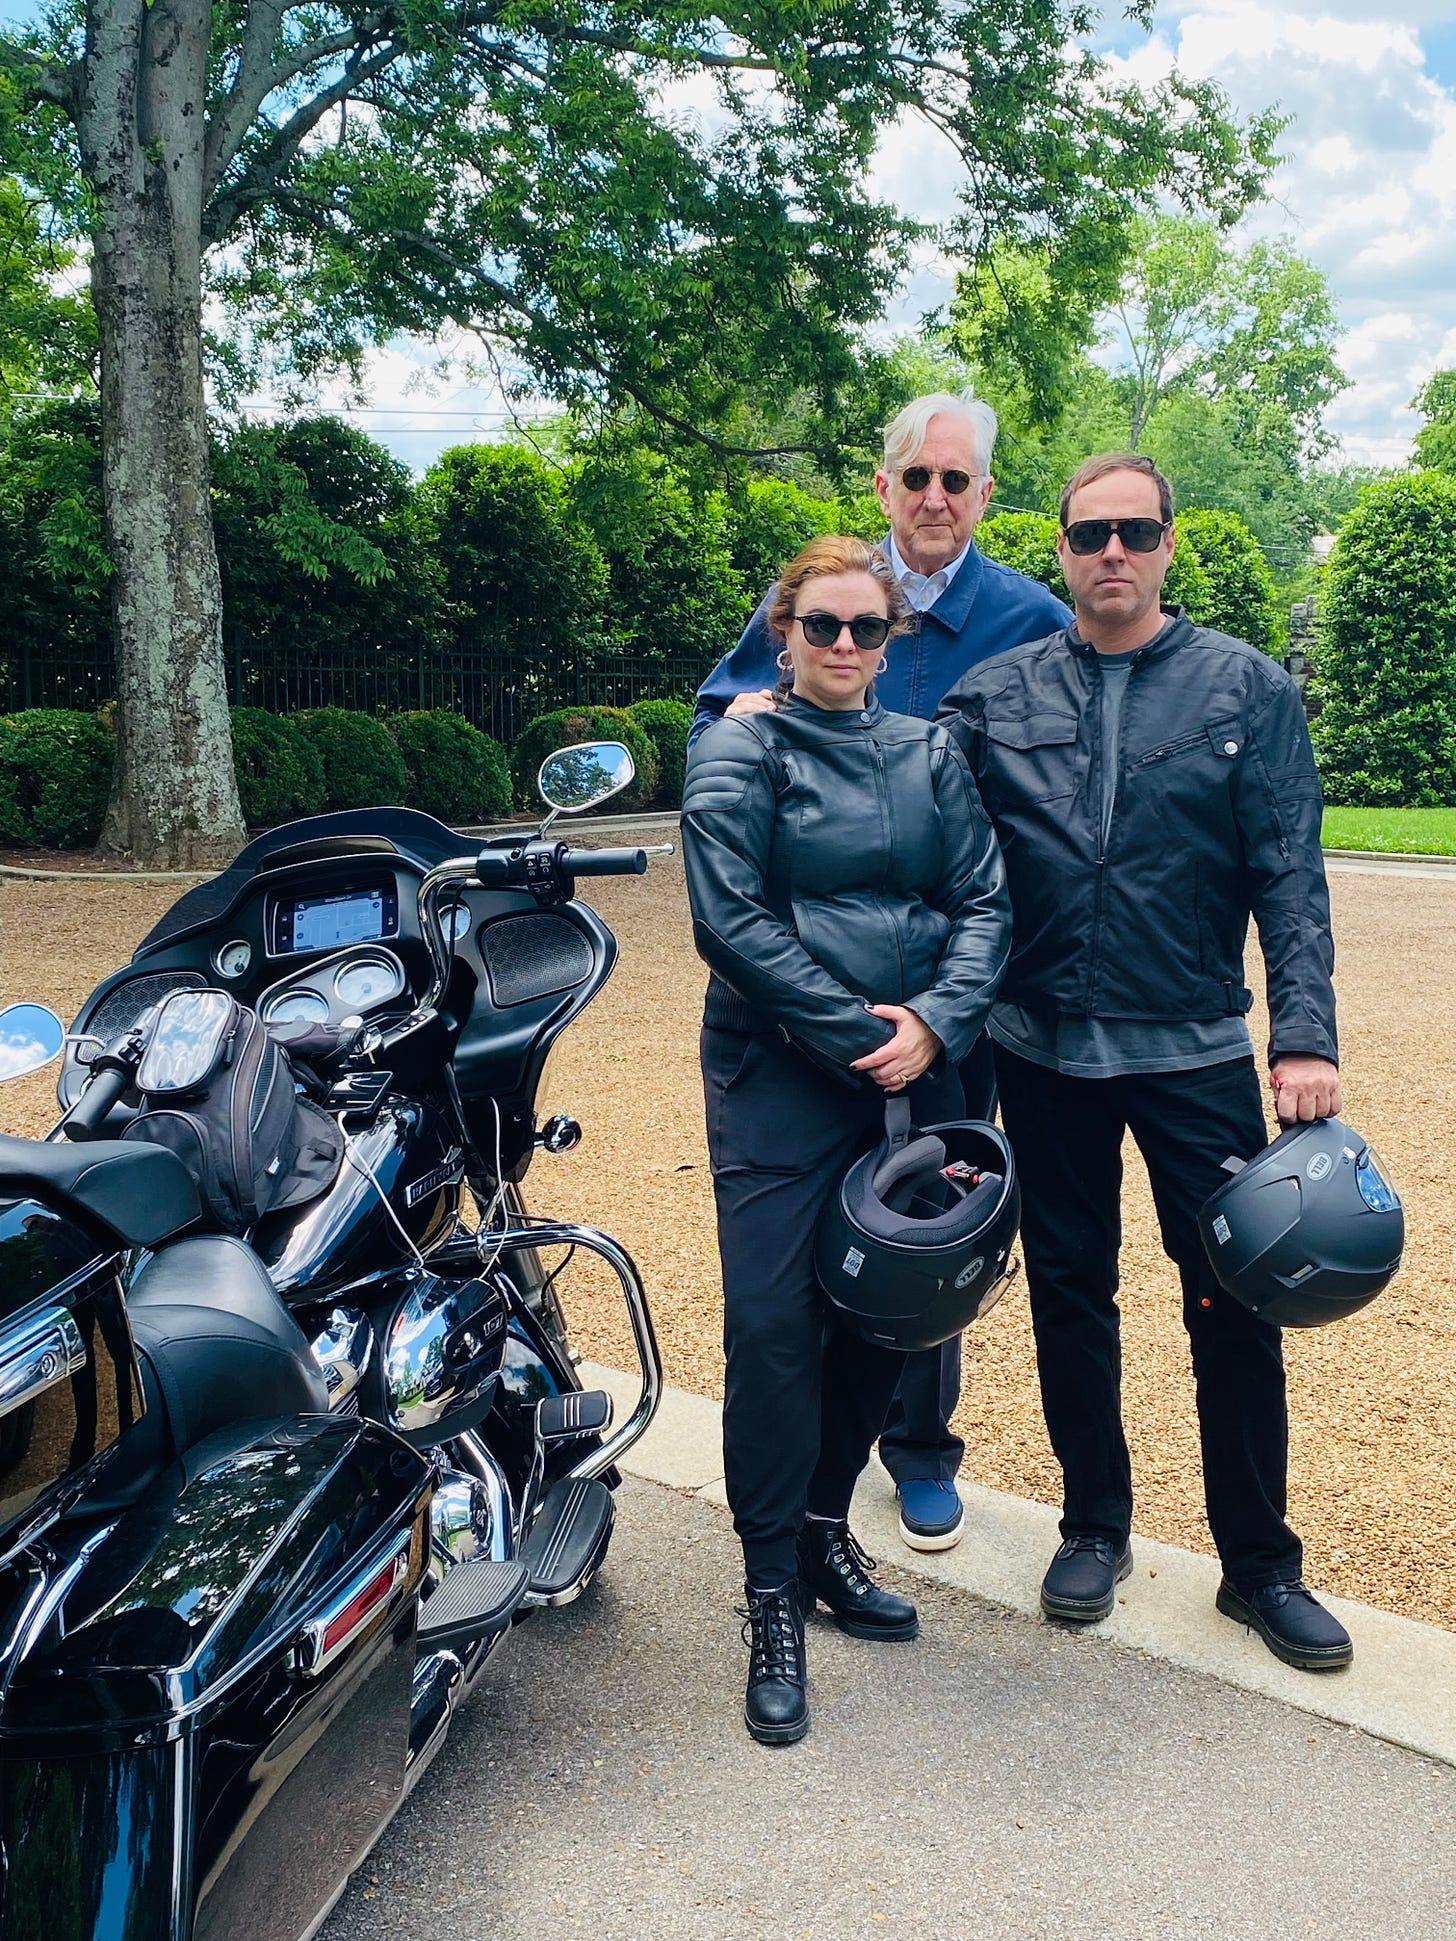 Amber and Derrick stand next to their parked Harley. They are wearing their riding gear and are holding their helmets. Behind them, T Bone Burnett stands with his hand on Amber's shoulder. They all wear sunglasses and look into the camera, unsmiling. 